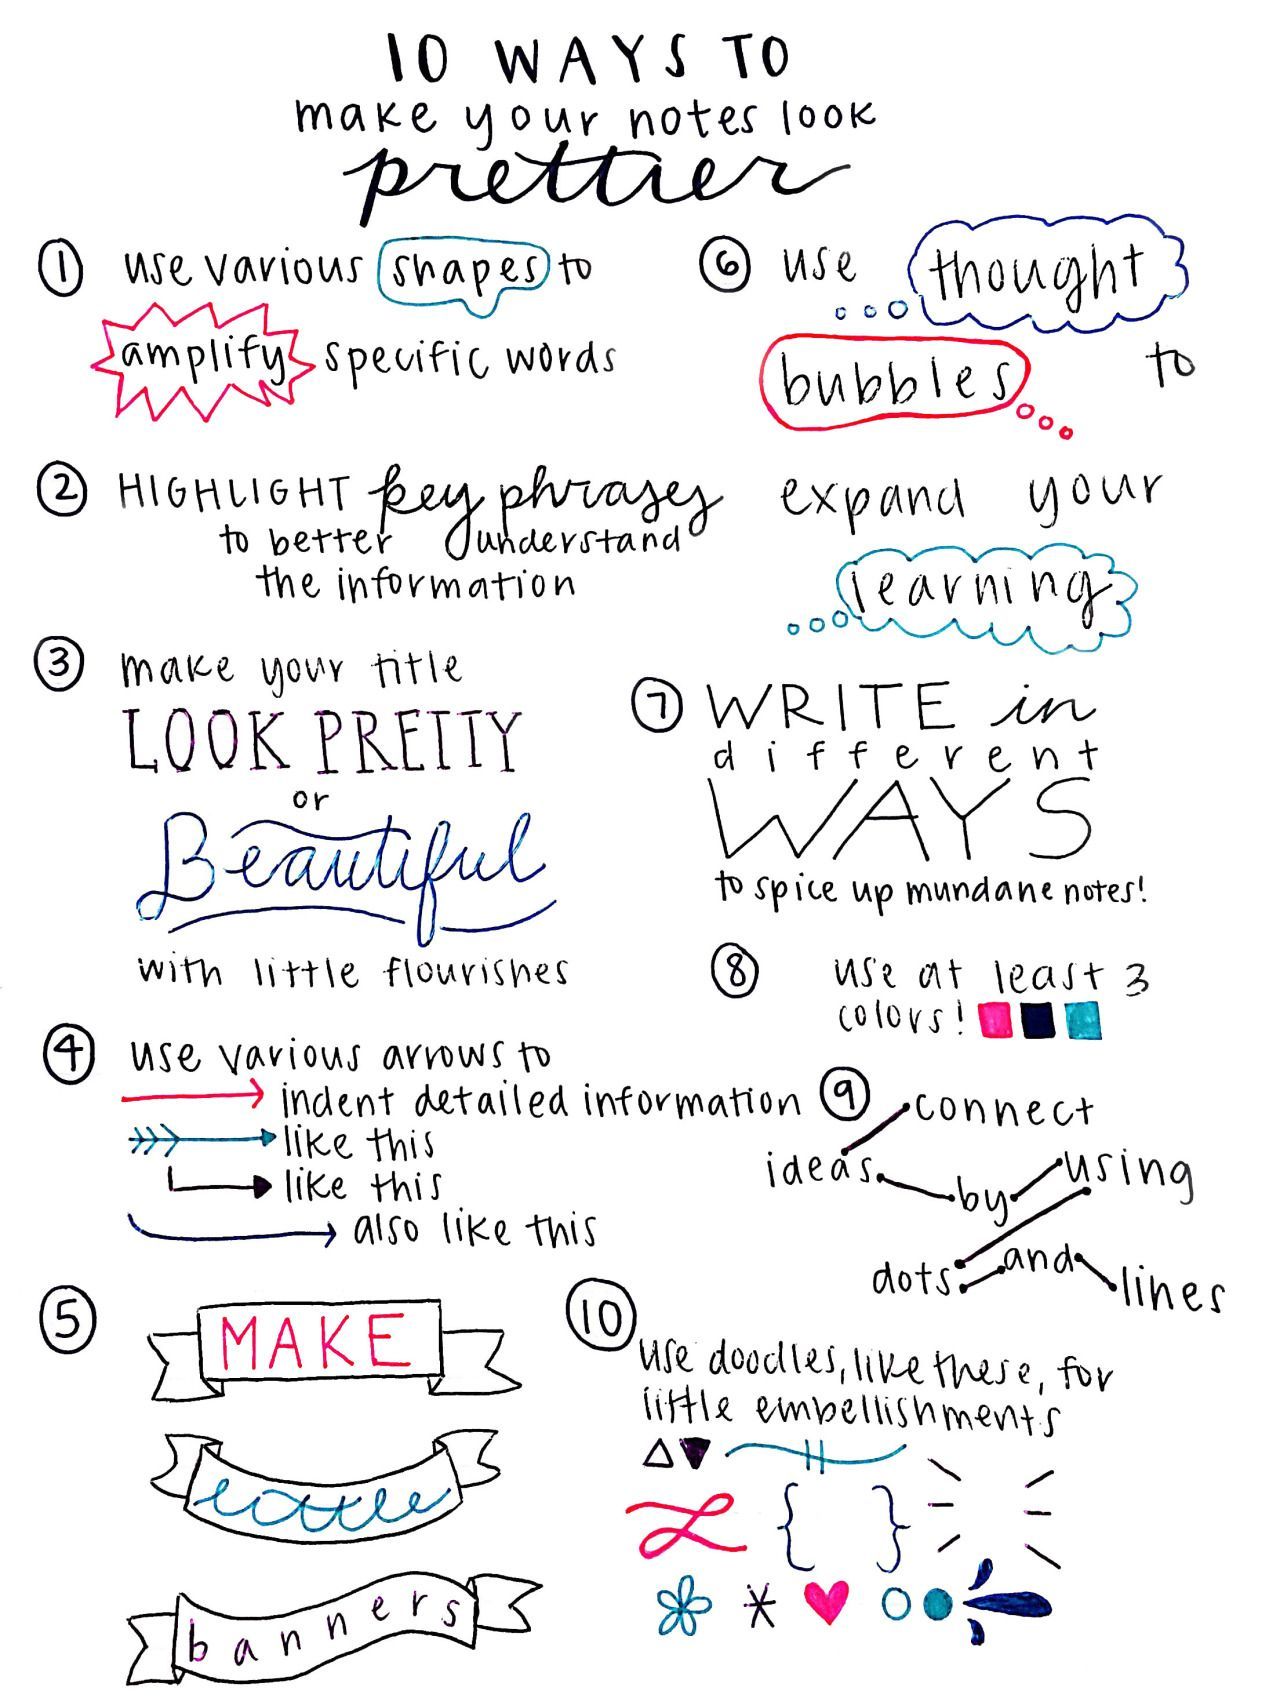 colourfulstudy: “ studywithpaigey: “ 10 Ways to Make Your Notes Look Prettier, a helpful list made by me, Paige Hahs :) ” So